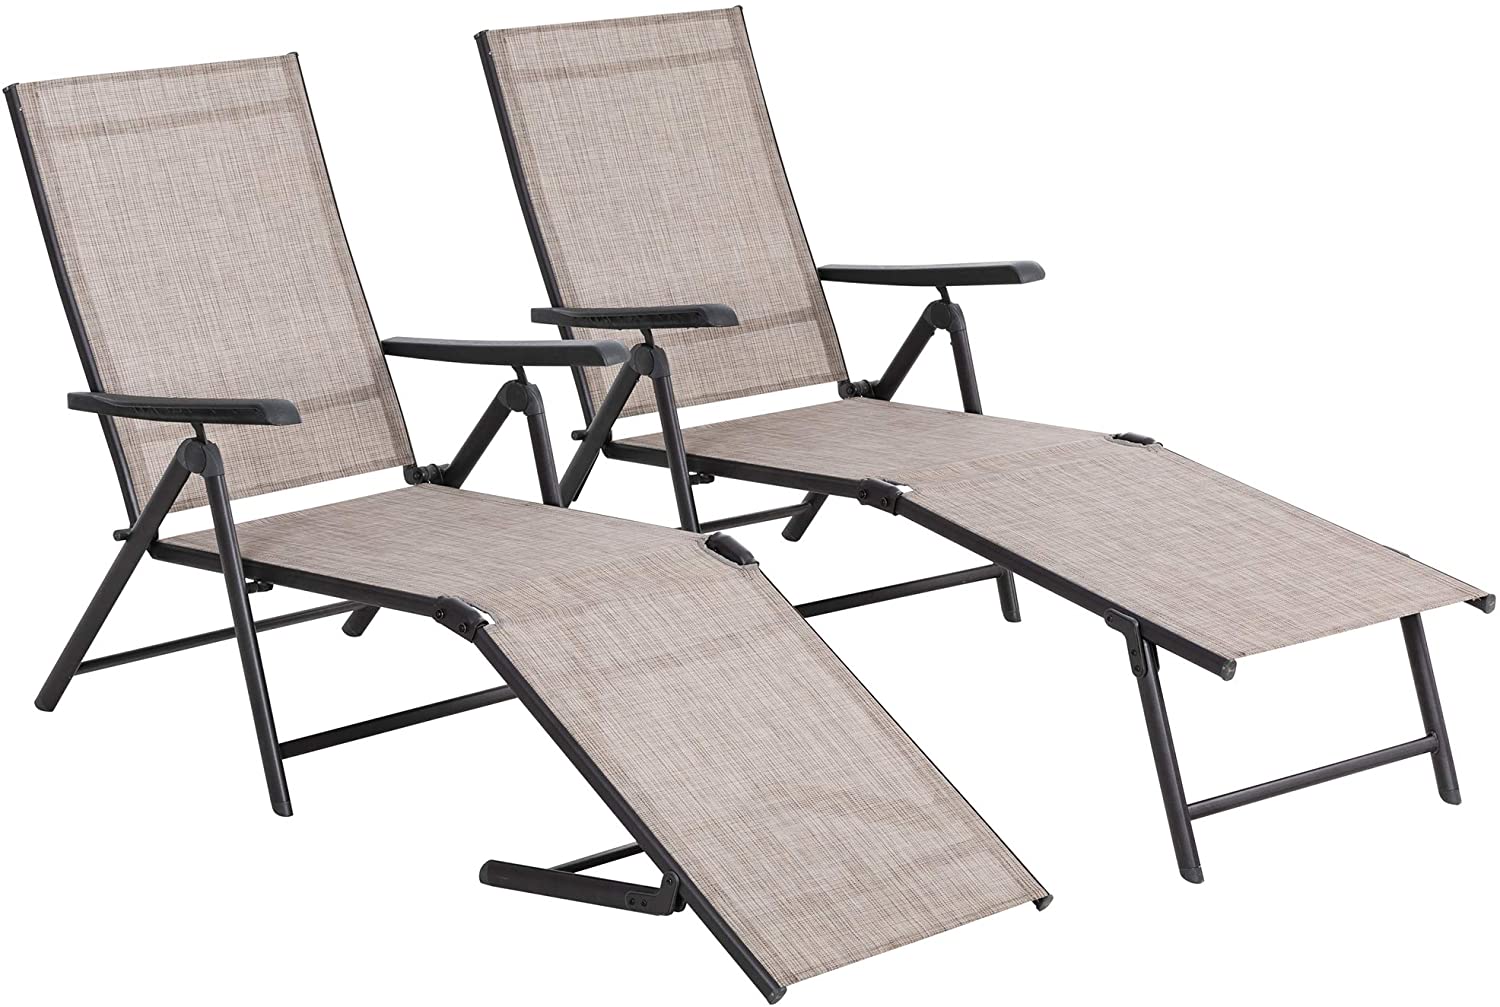 Sobaniilo Patio Chaise Lounge Chairs Set of 2, Outdoor Adjustable Steel Textiline Folding Reclining Chairs, Brown - image 3 of 7